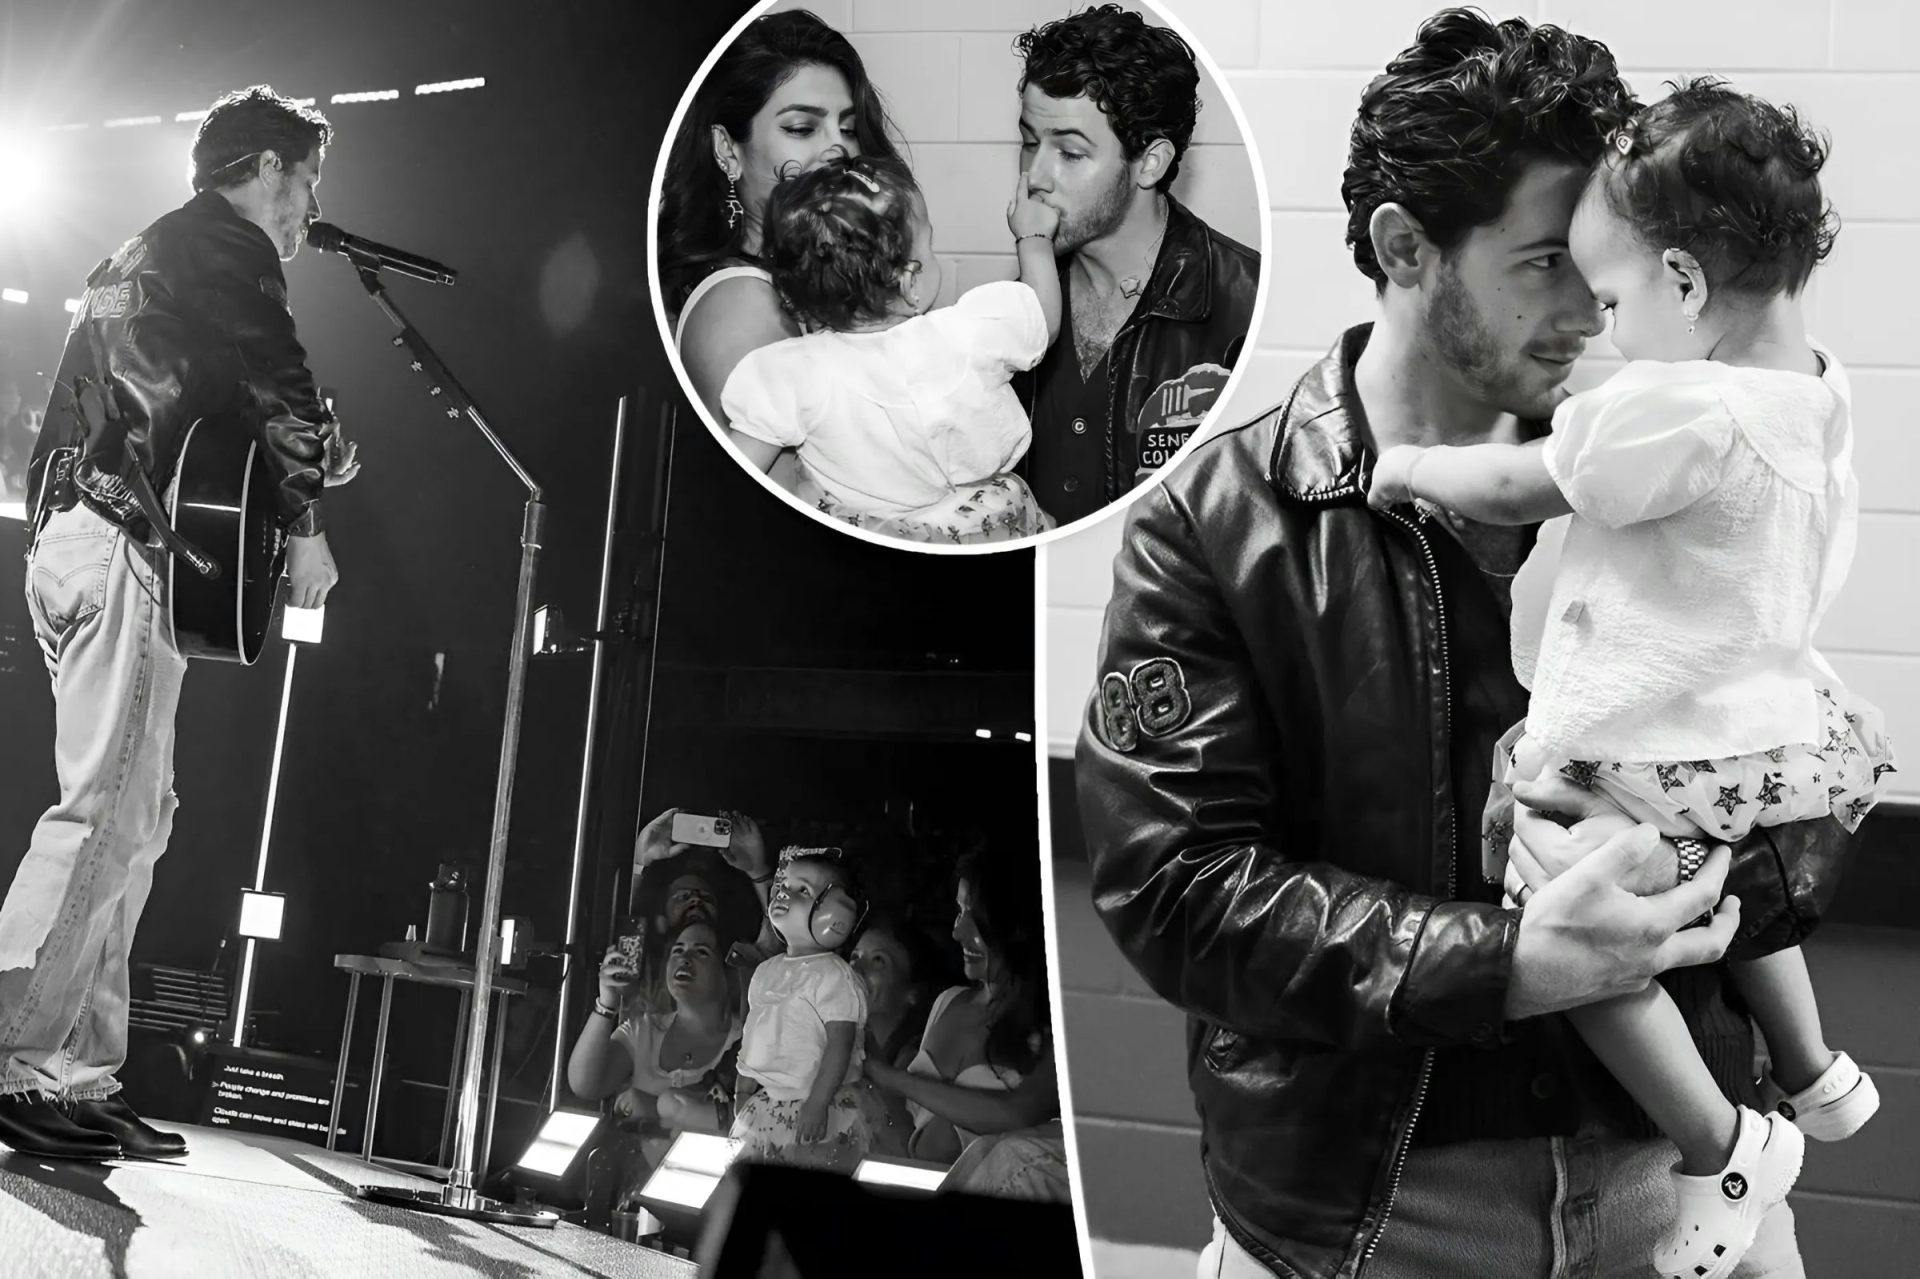 Cover Image for Nick’s comment line made fans to exclaim their admiration for the Nick-Priyanka couple when he shared an adorable slew of photos of his daughter Malti and wife Priyanka Chopra backstage of a Jonas Brothers concert.